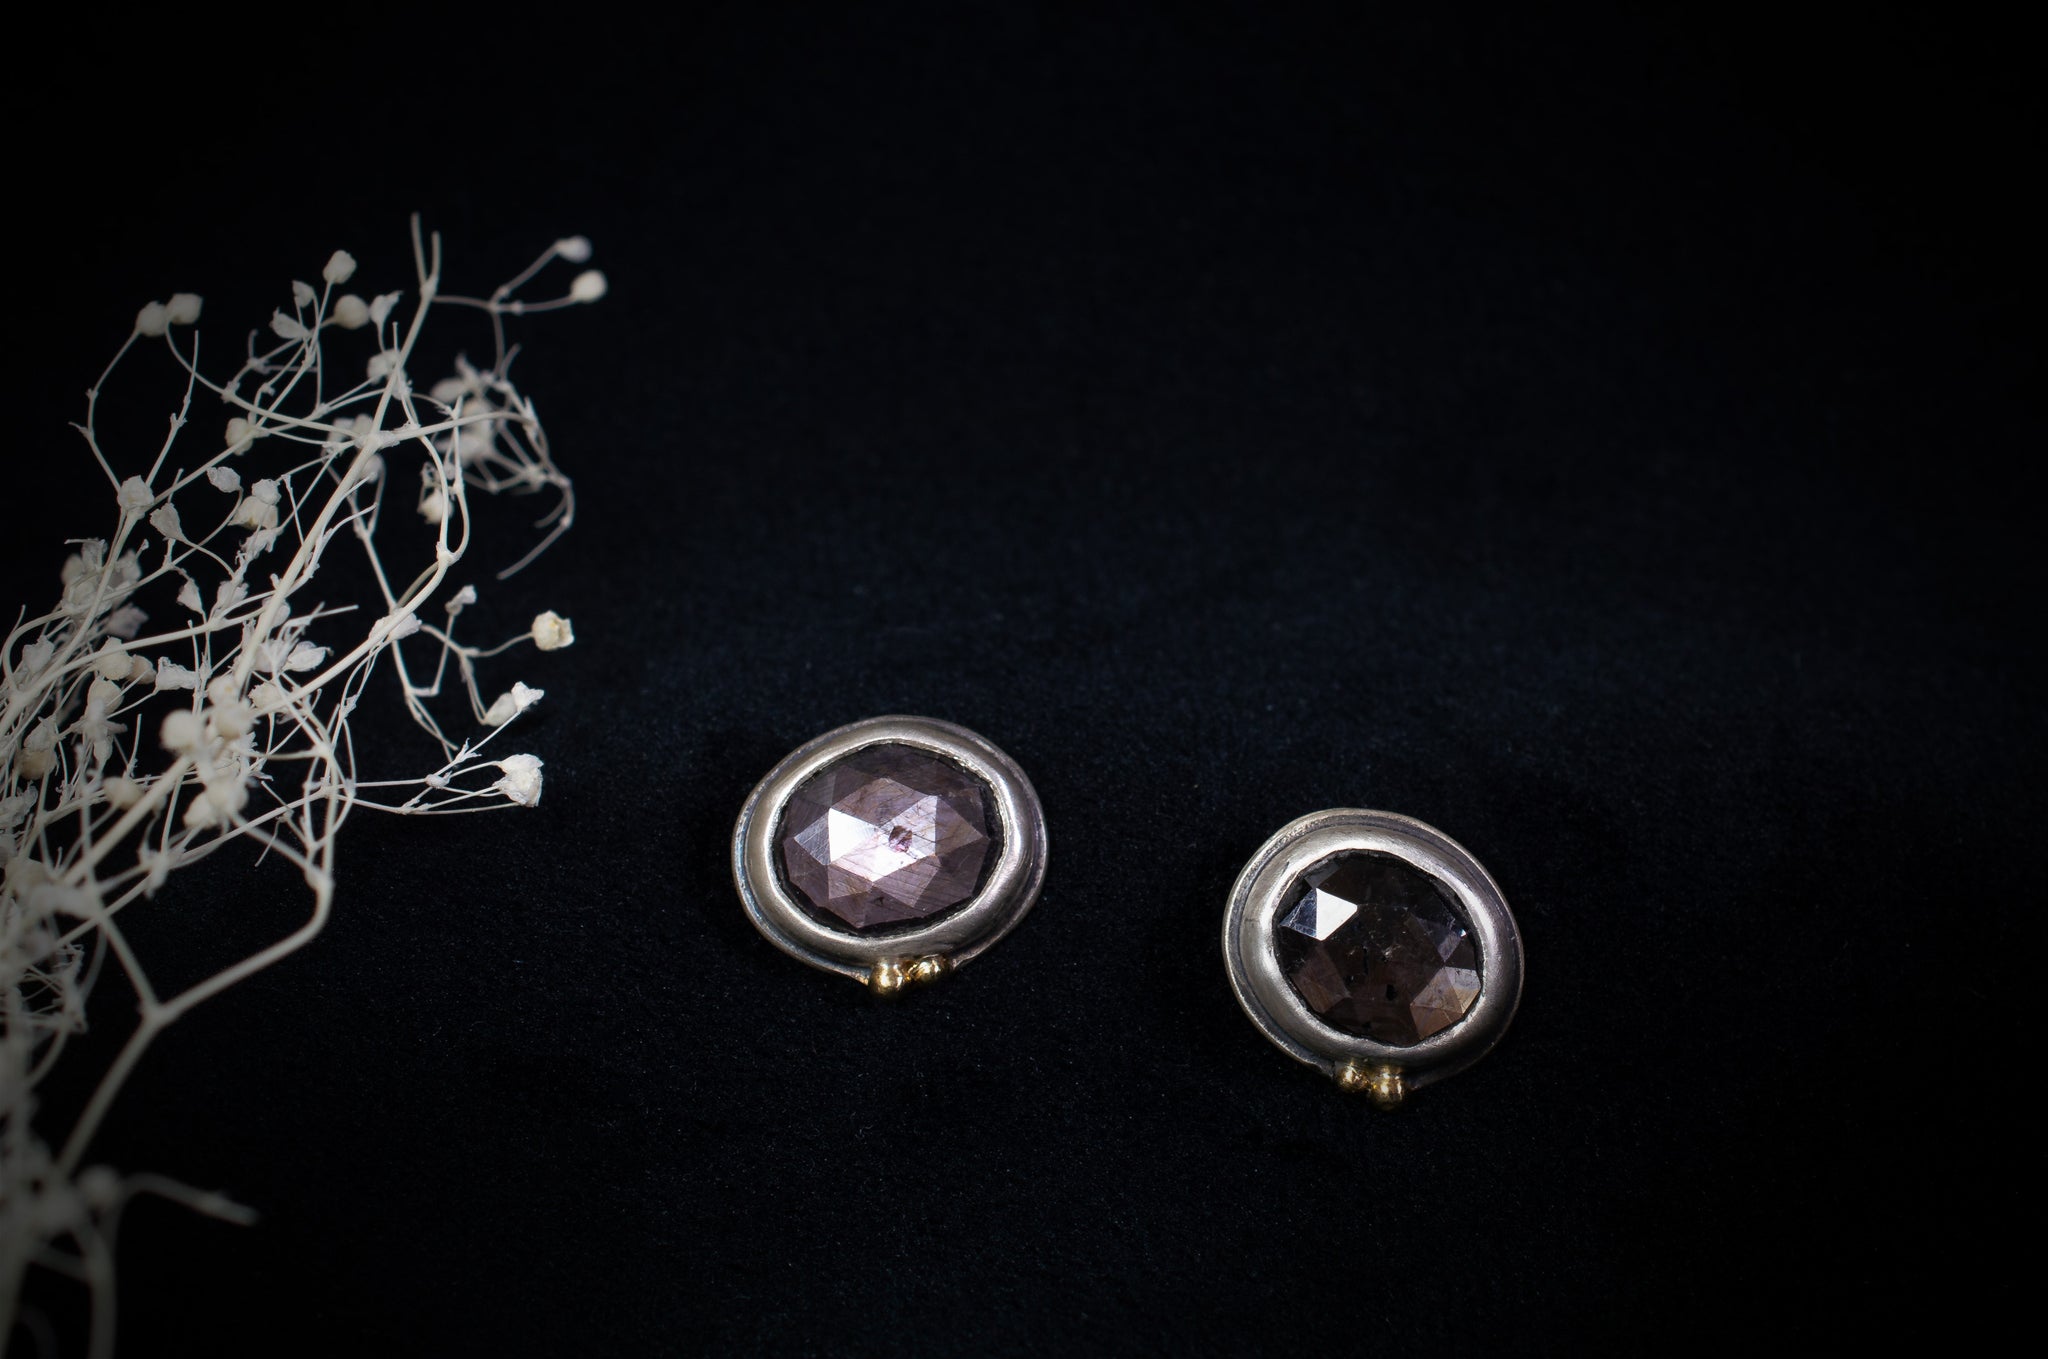 Bronze Sapphire Stud Earrings with Gold Accents, e43